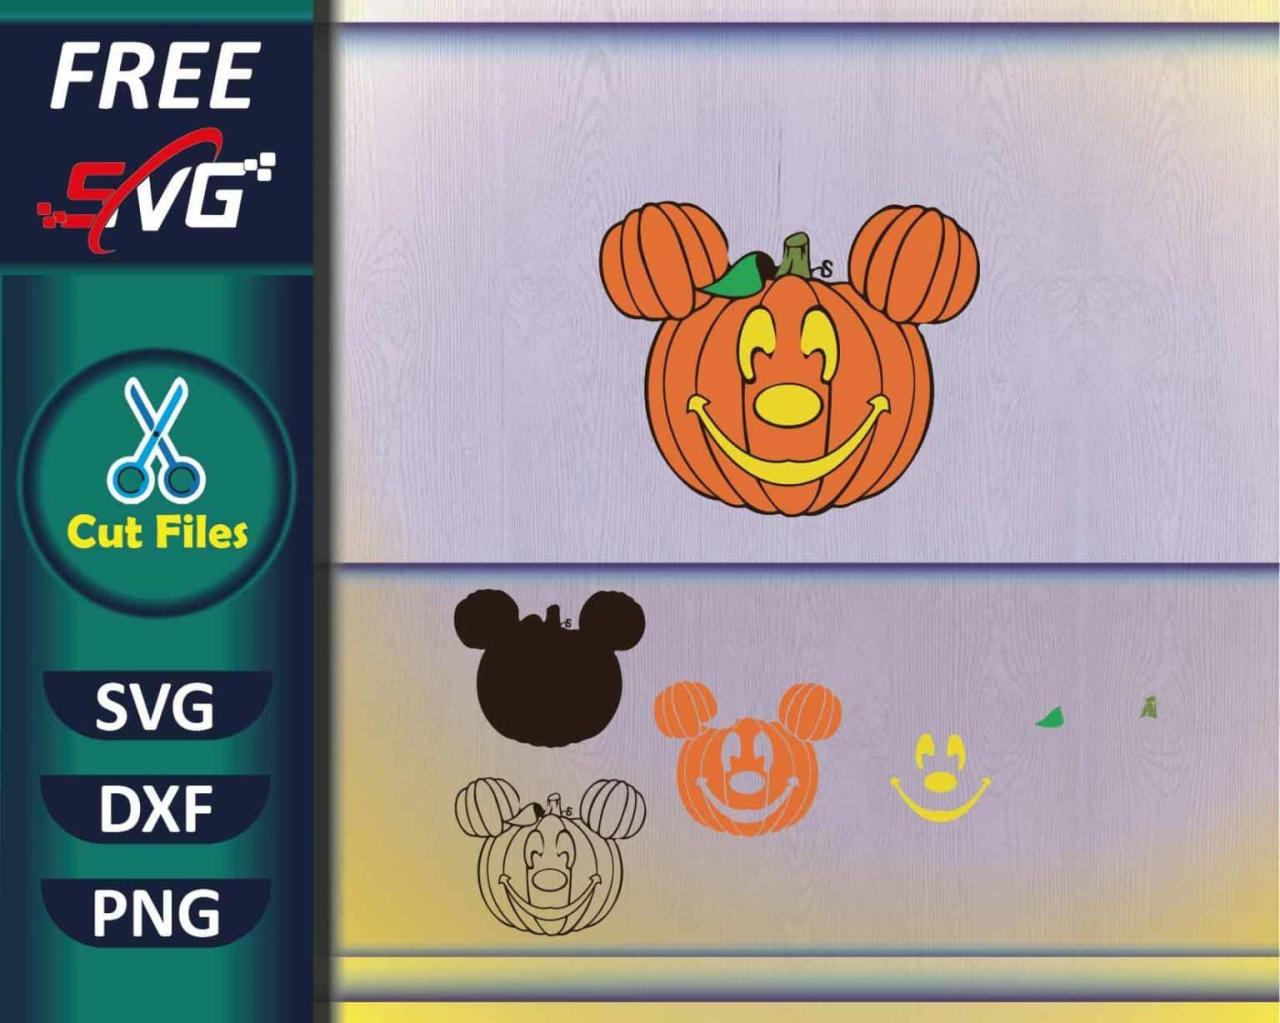 Pumpkin 1928 2019 2019 With Mickey Mouse Head Svg